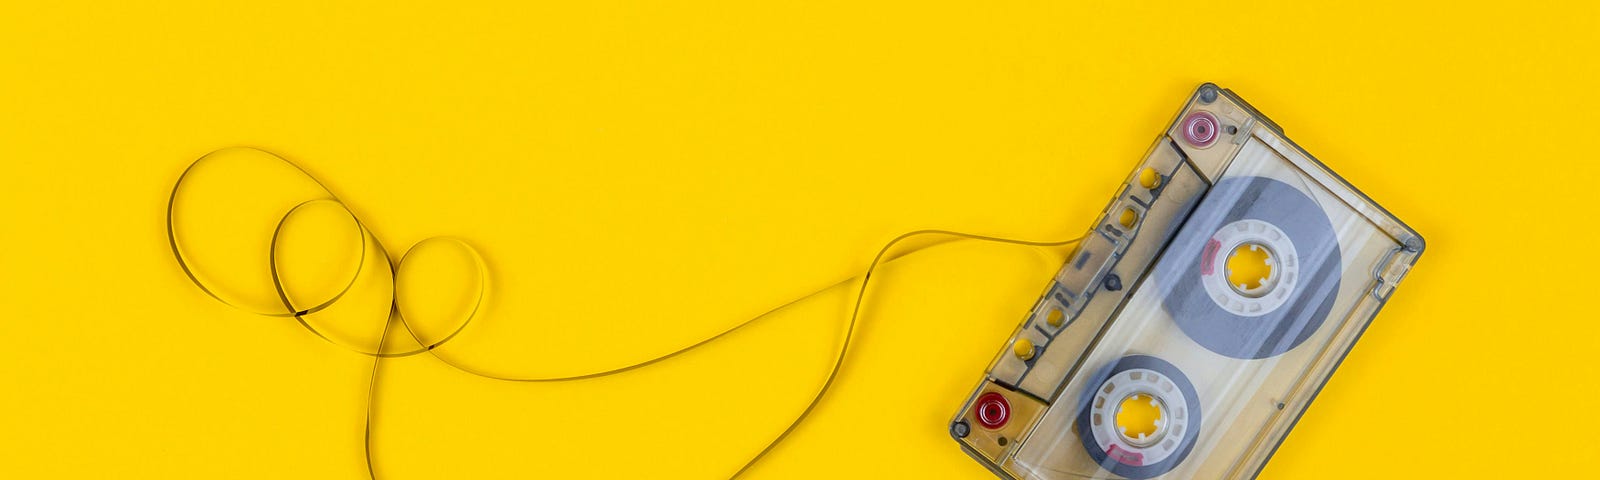 A cassette tape with some of the tape unspooled, plain yellow background